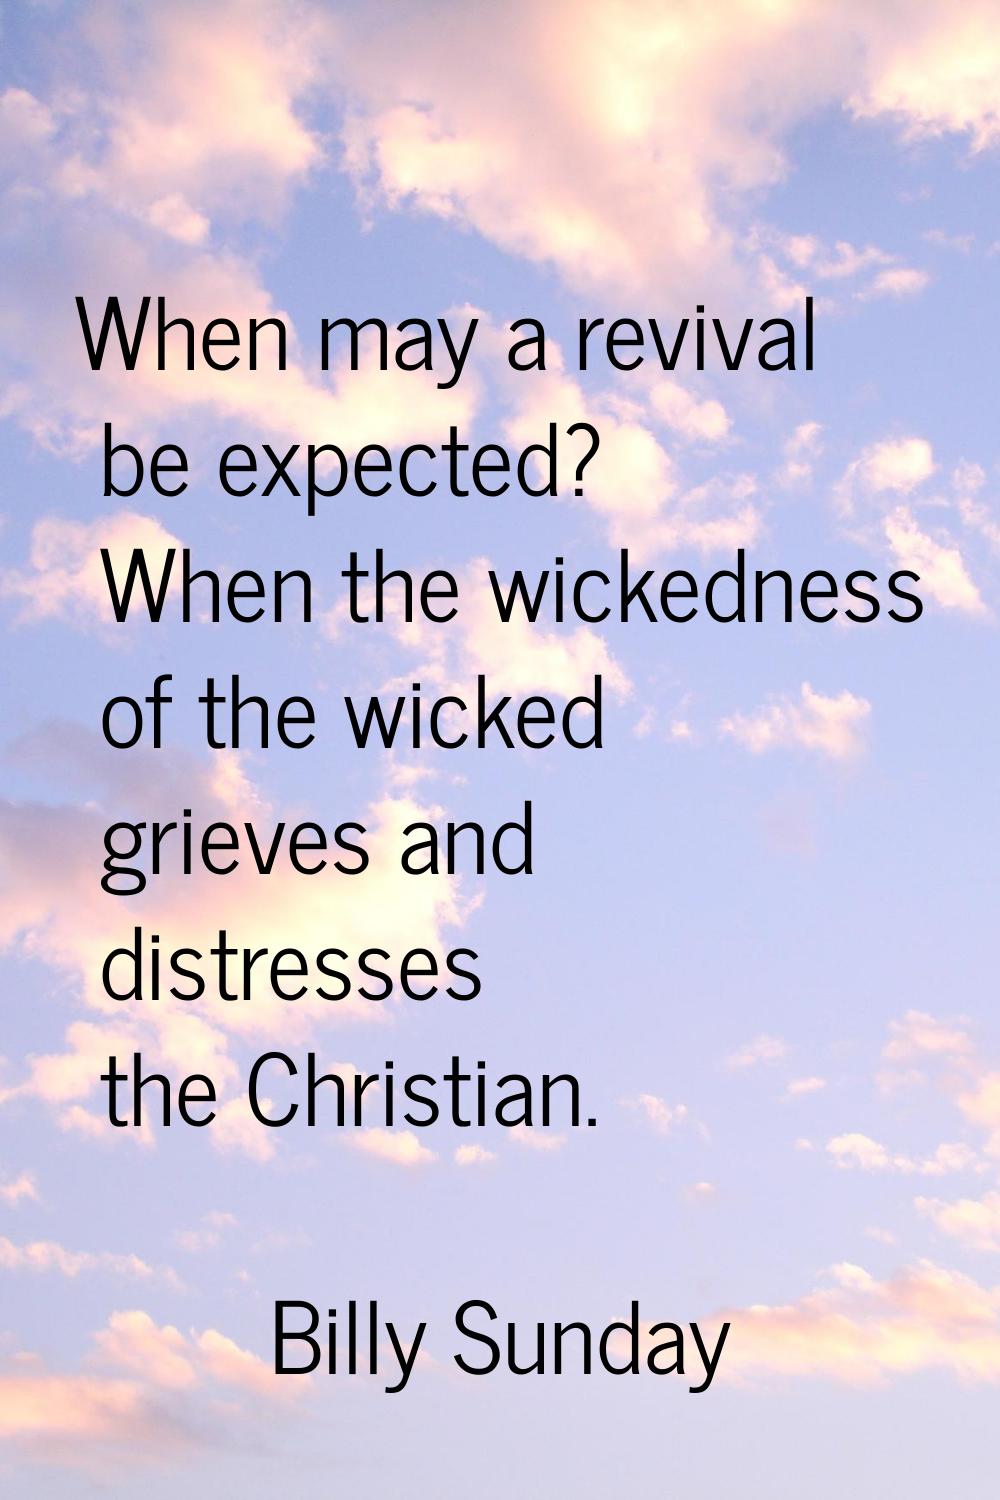 When may a revival be expected? When the wickedness of the wicked grieves and distresses the Christ